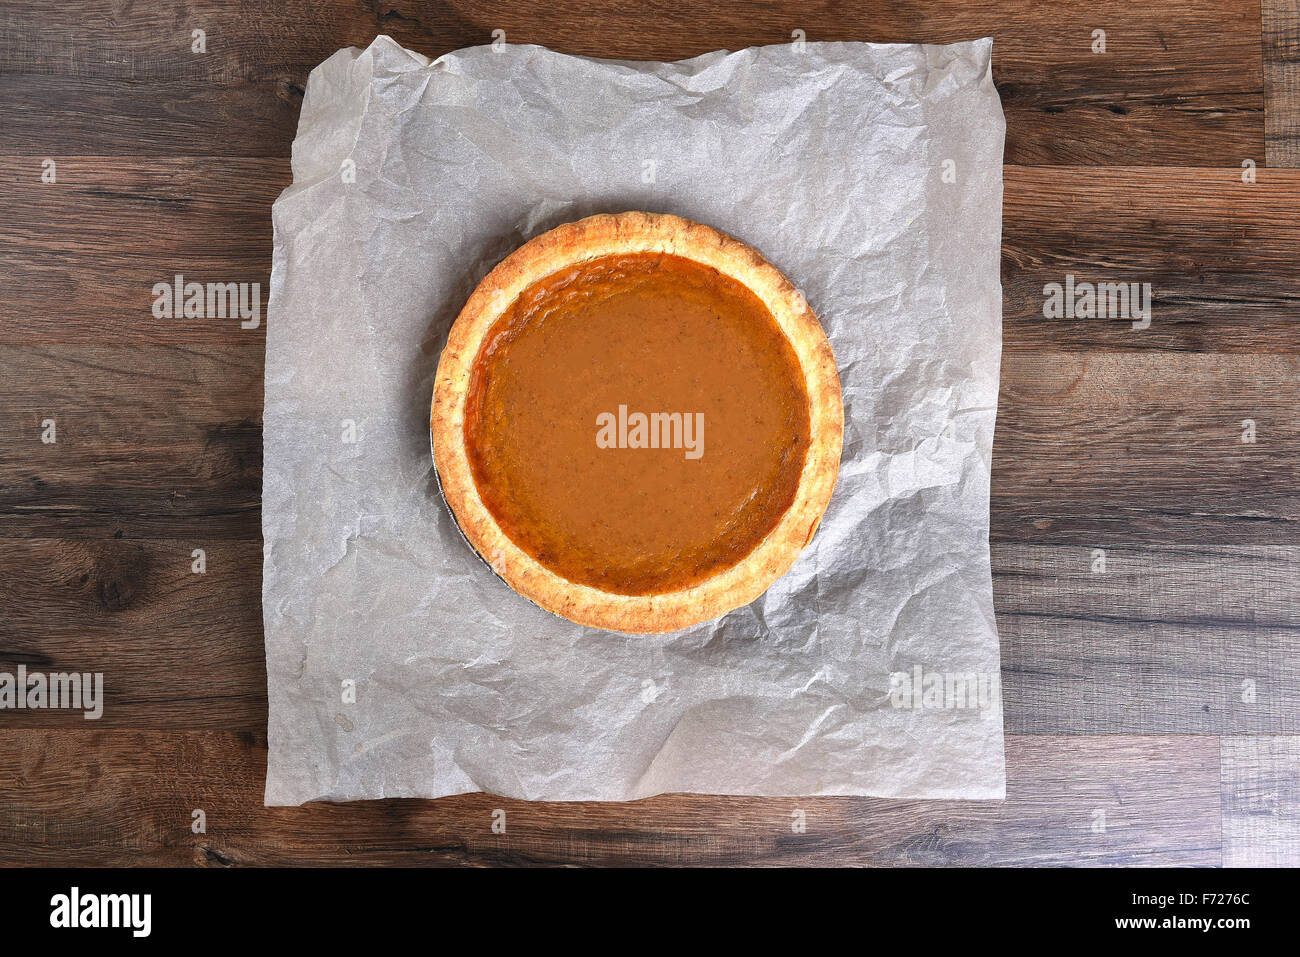 Overhead view of a whole pumpkin pie on parchment paper and dark wood table. Stock Photo